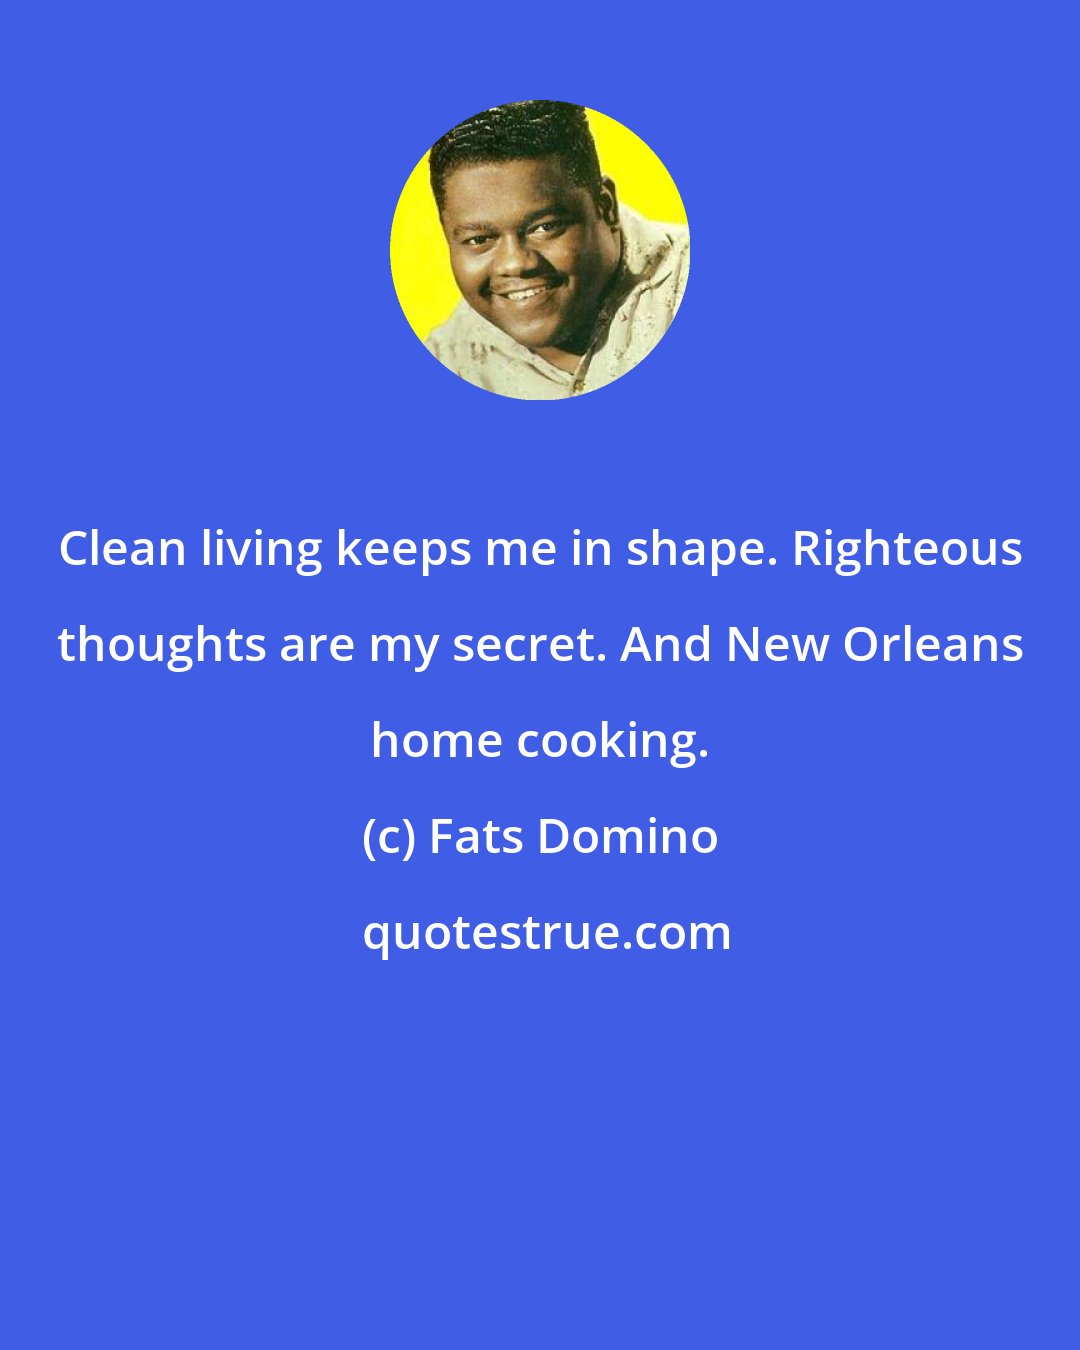 Fats Domino: Clean living keeps me in shape. Righteous thoughts are my secret. And New Orleans home cooking.